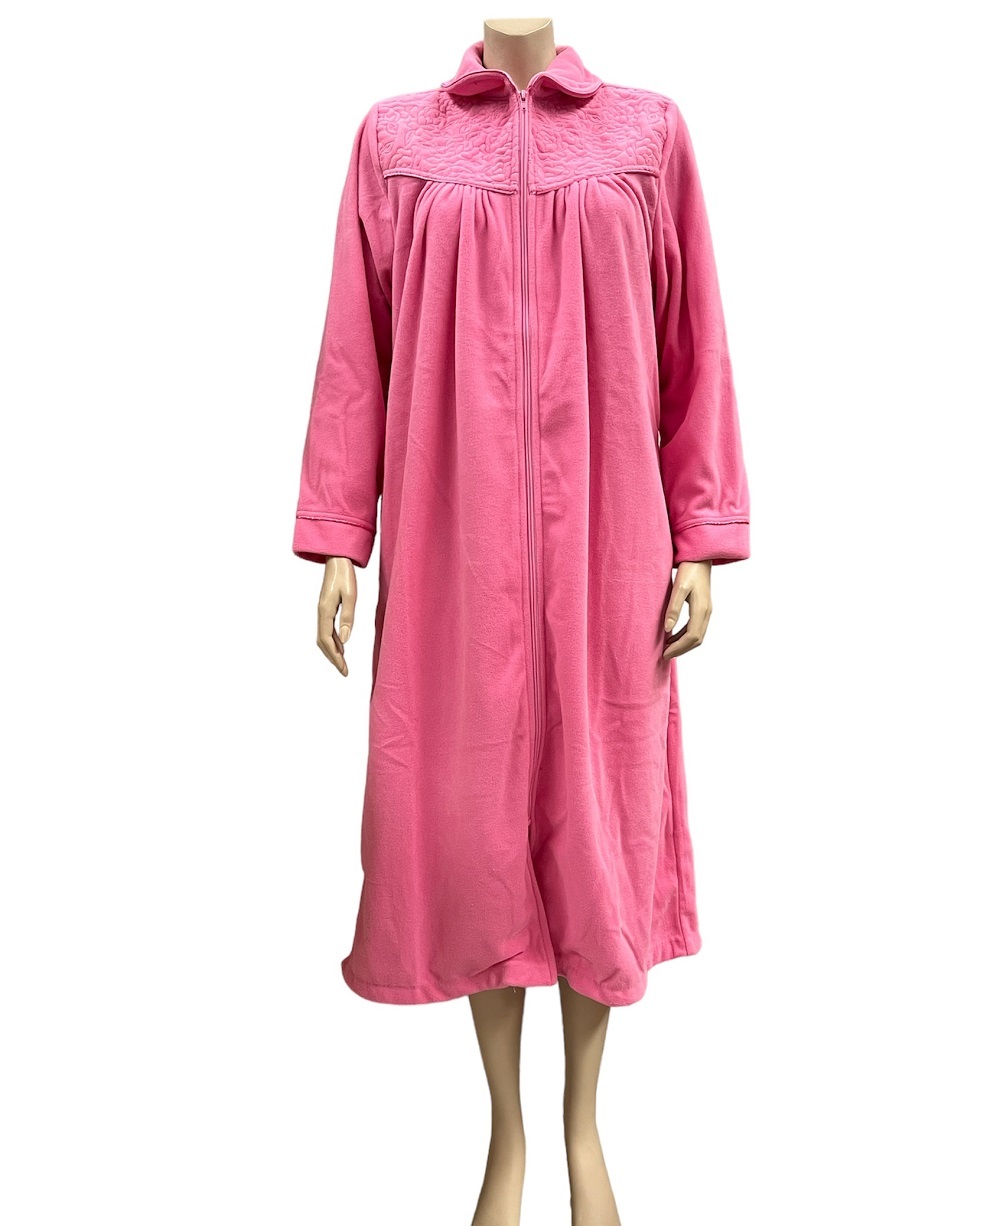 Ladies Snuggle Dressing Gown Robes Extra Long Super Soft Cuddly Bathrobe  Gowns | eBay